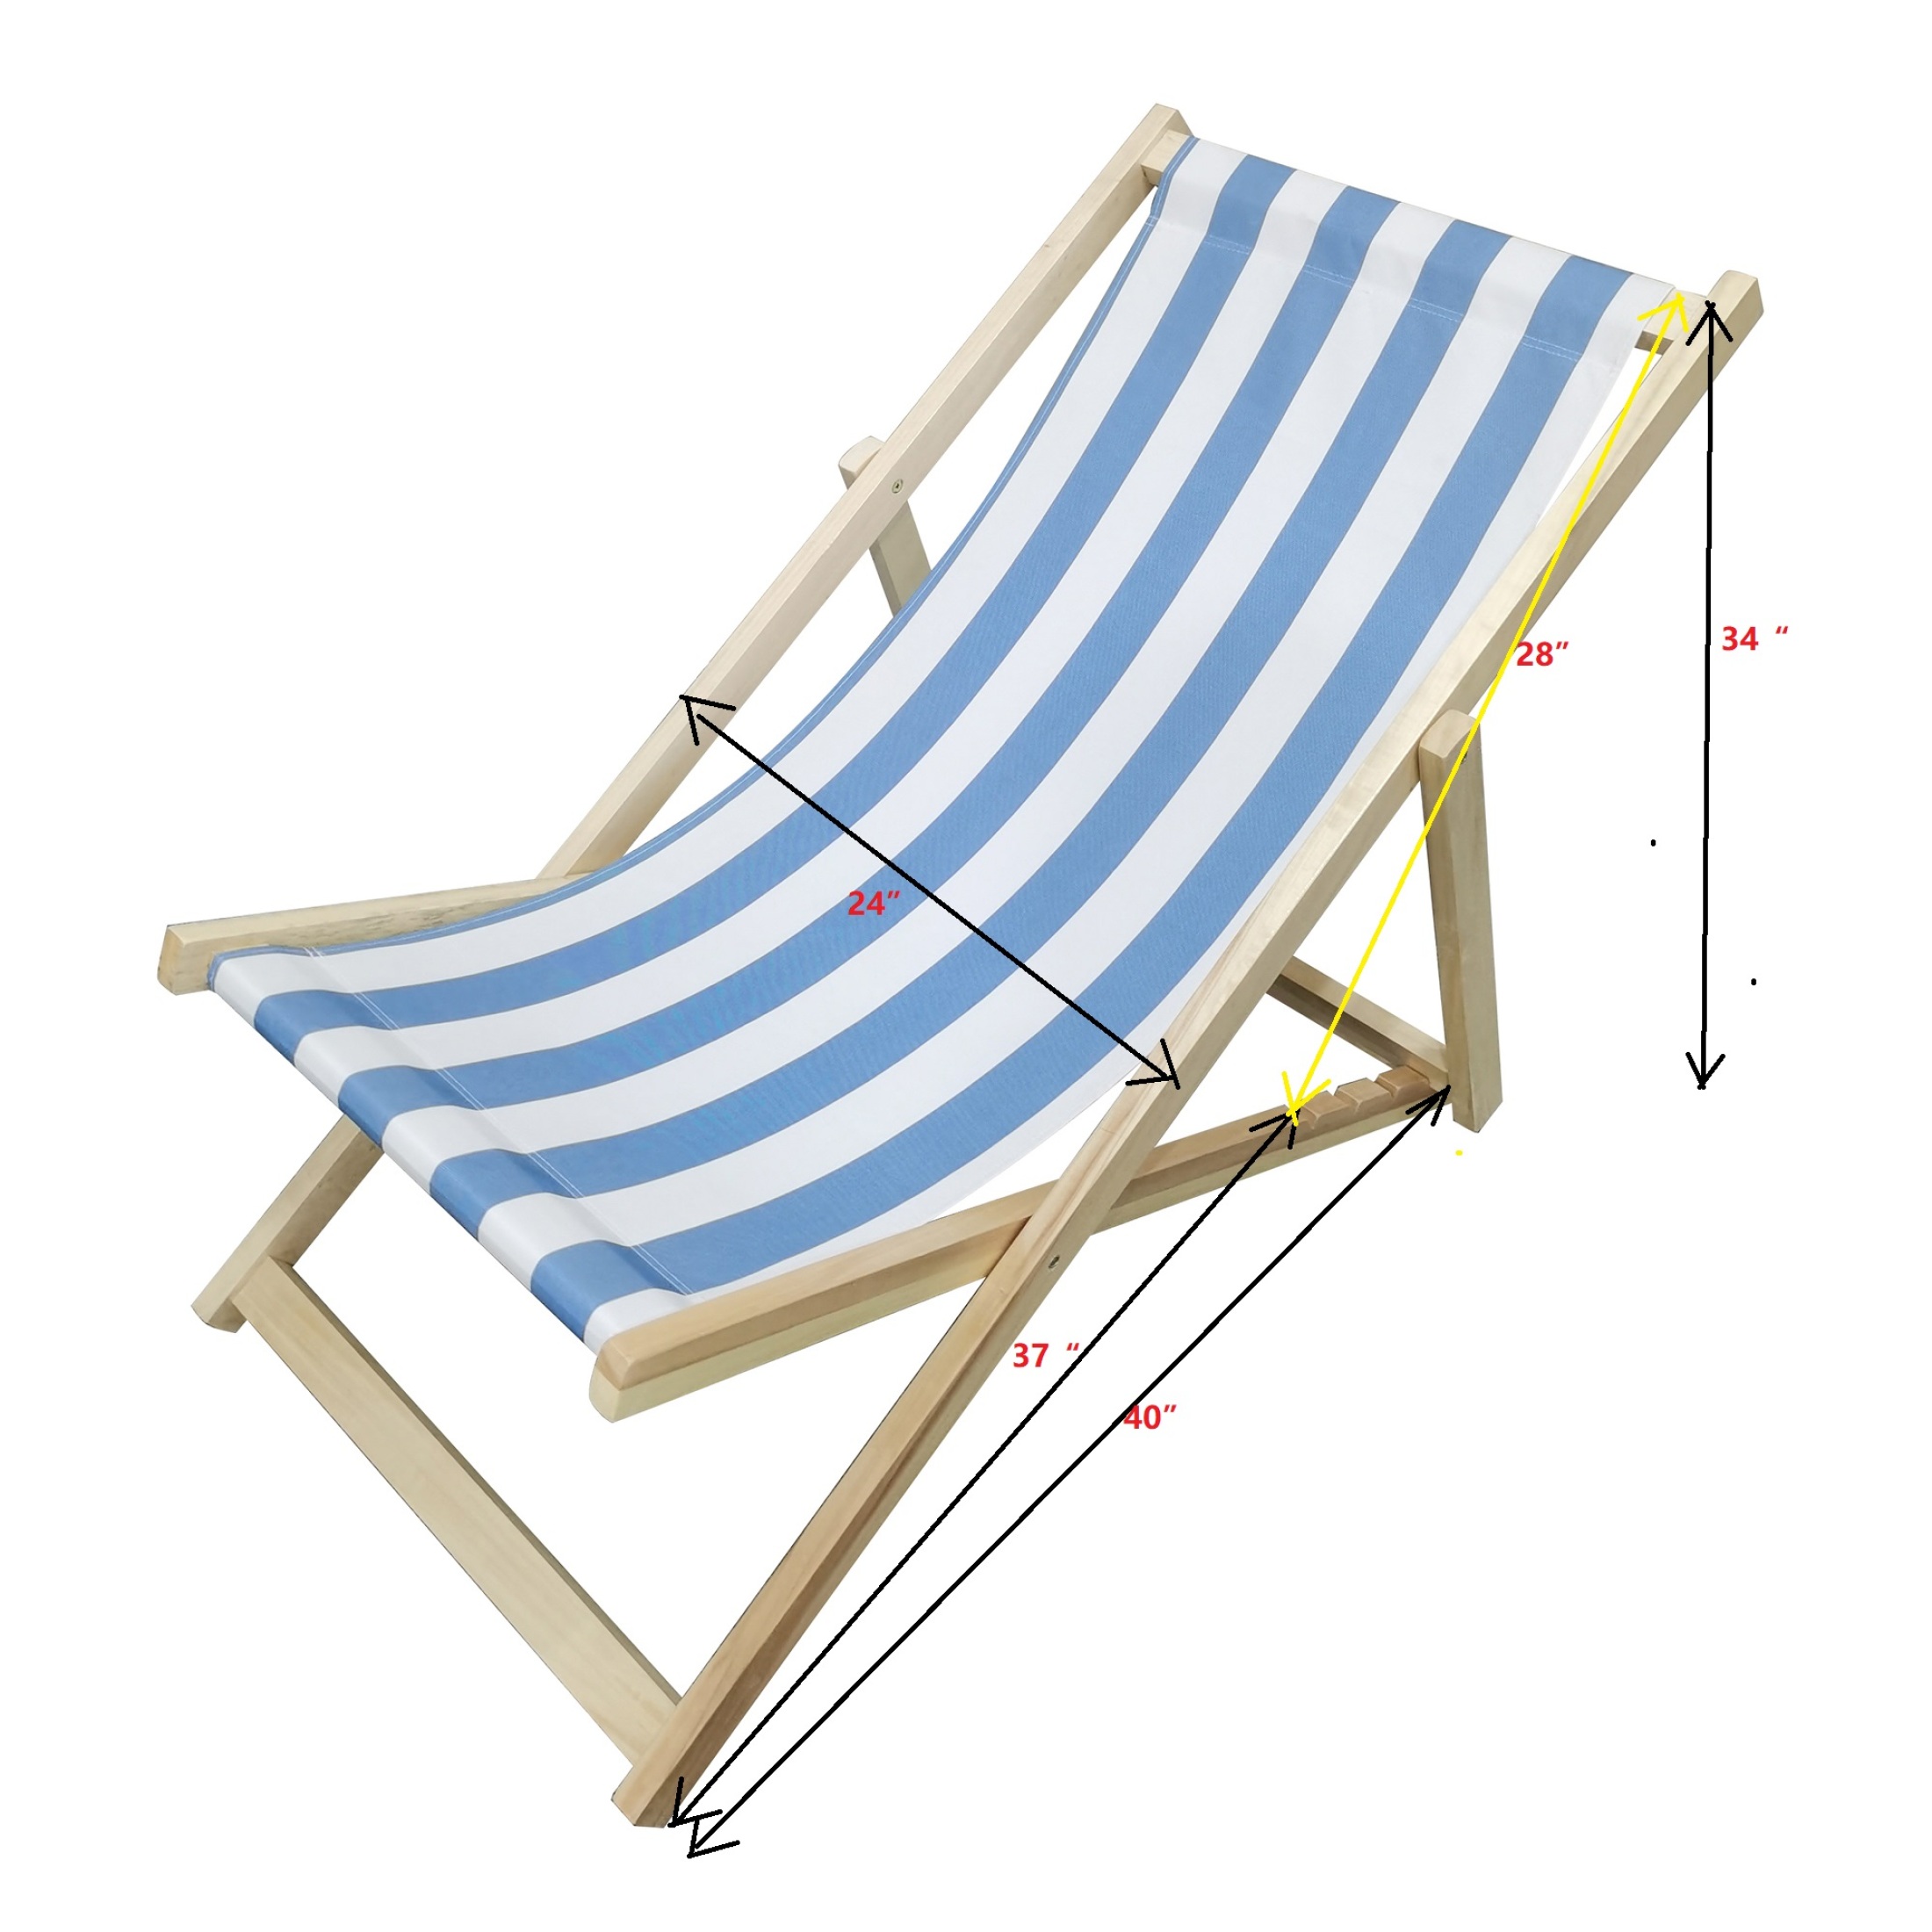 Pouseayar Foldable Sling Chair,Outdoor Beach Chair Chaise Lounge, Blue - image 5 of 8